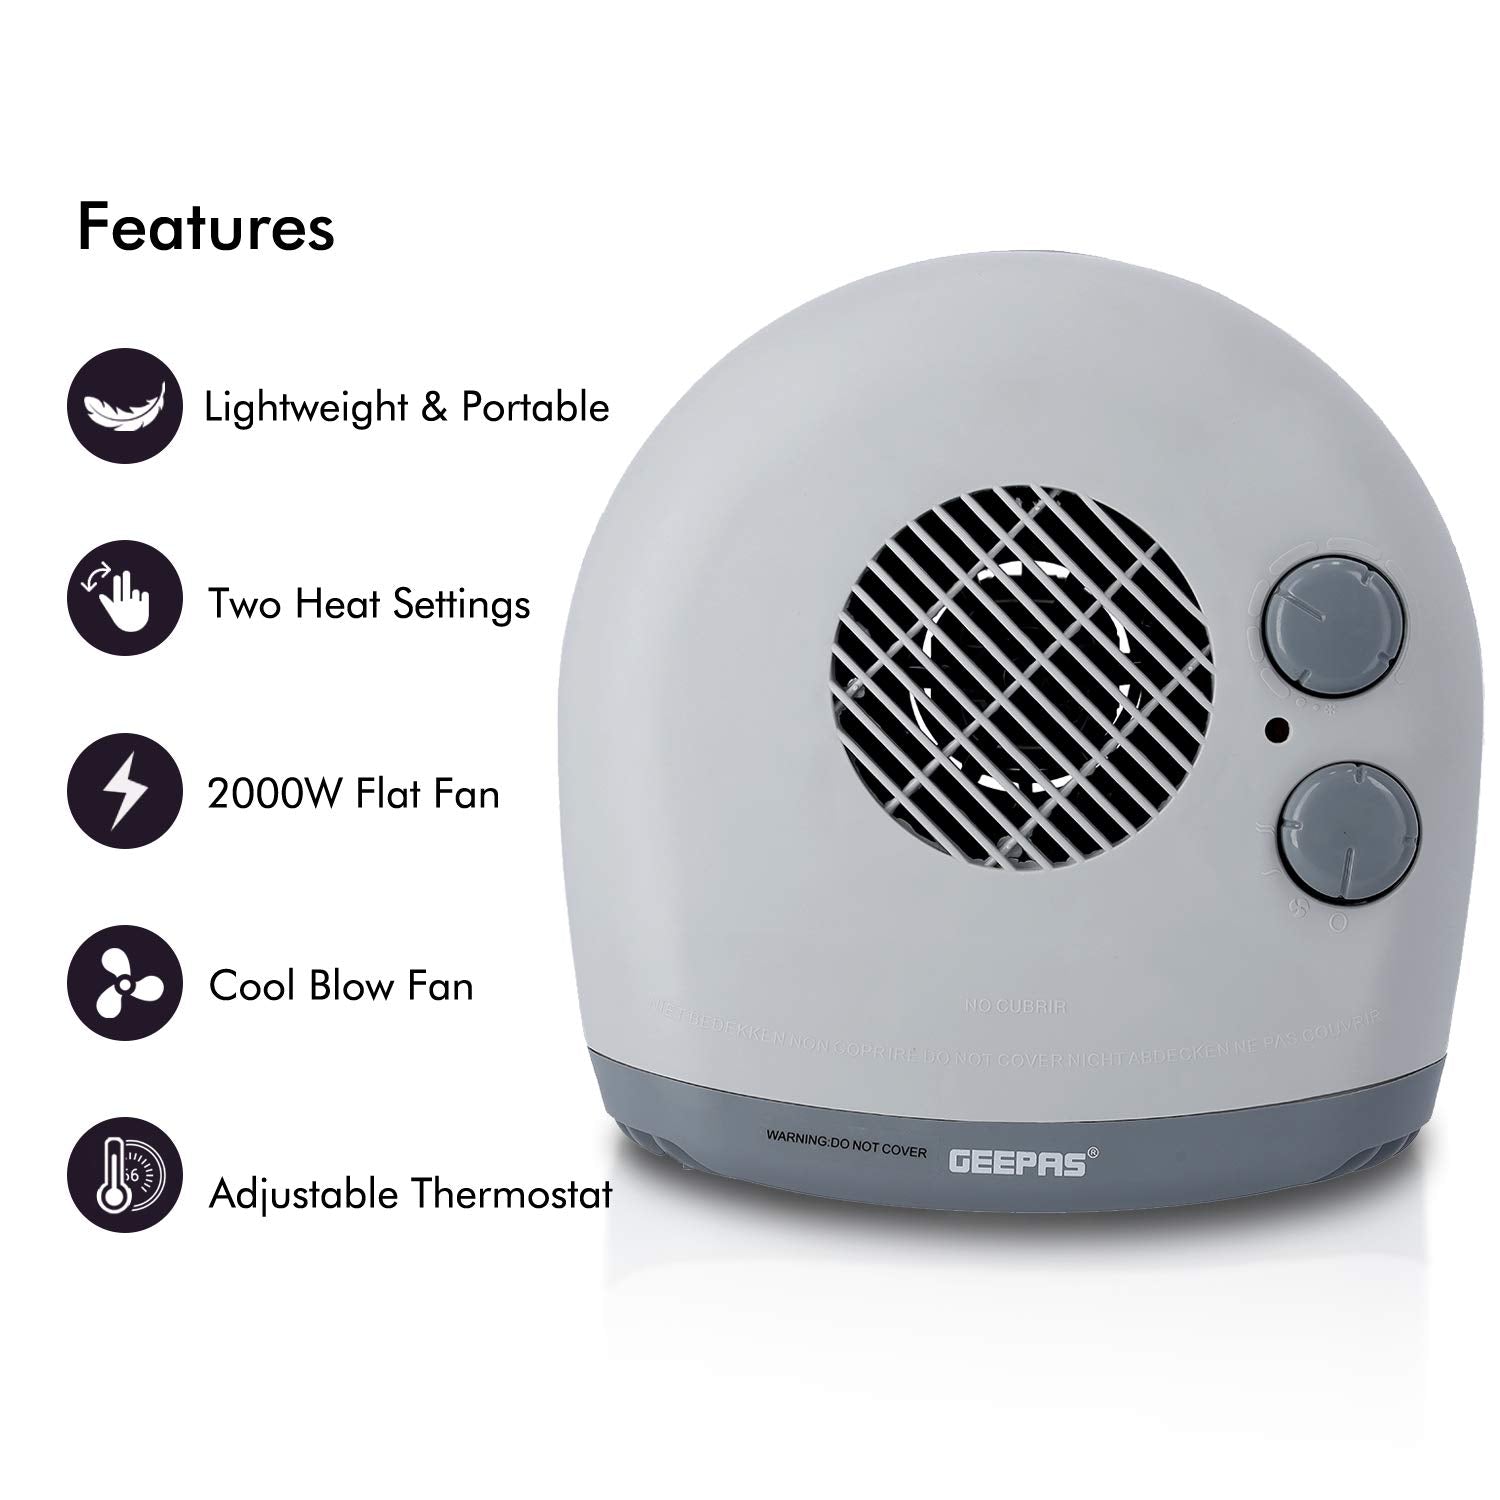 Geepas Portable Flat Fan Heater – Upright or Flatbed, Adjustable Thermostat with 2 Heat Settings 1000-2000W & Overheat Protection - Lightweight Heater with Cool, Warm & Hot Wind – 1 Years Warranty